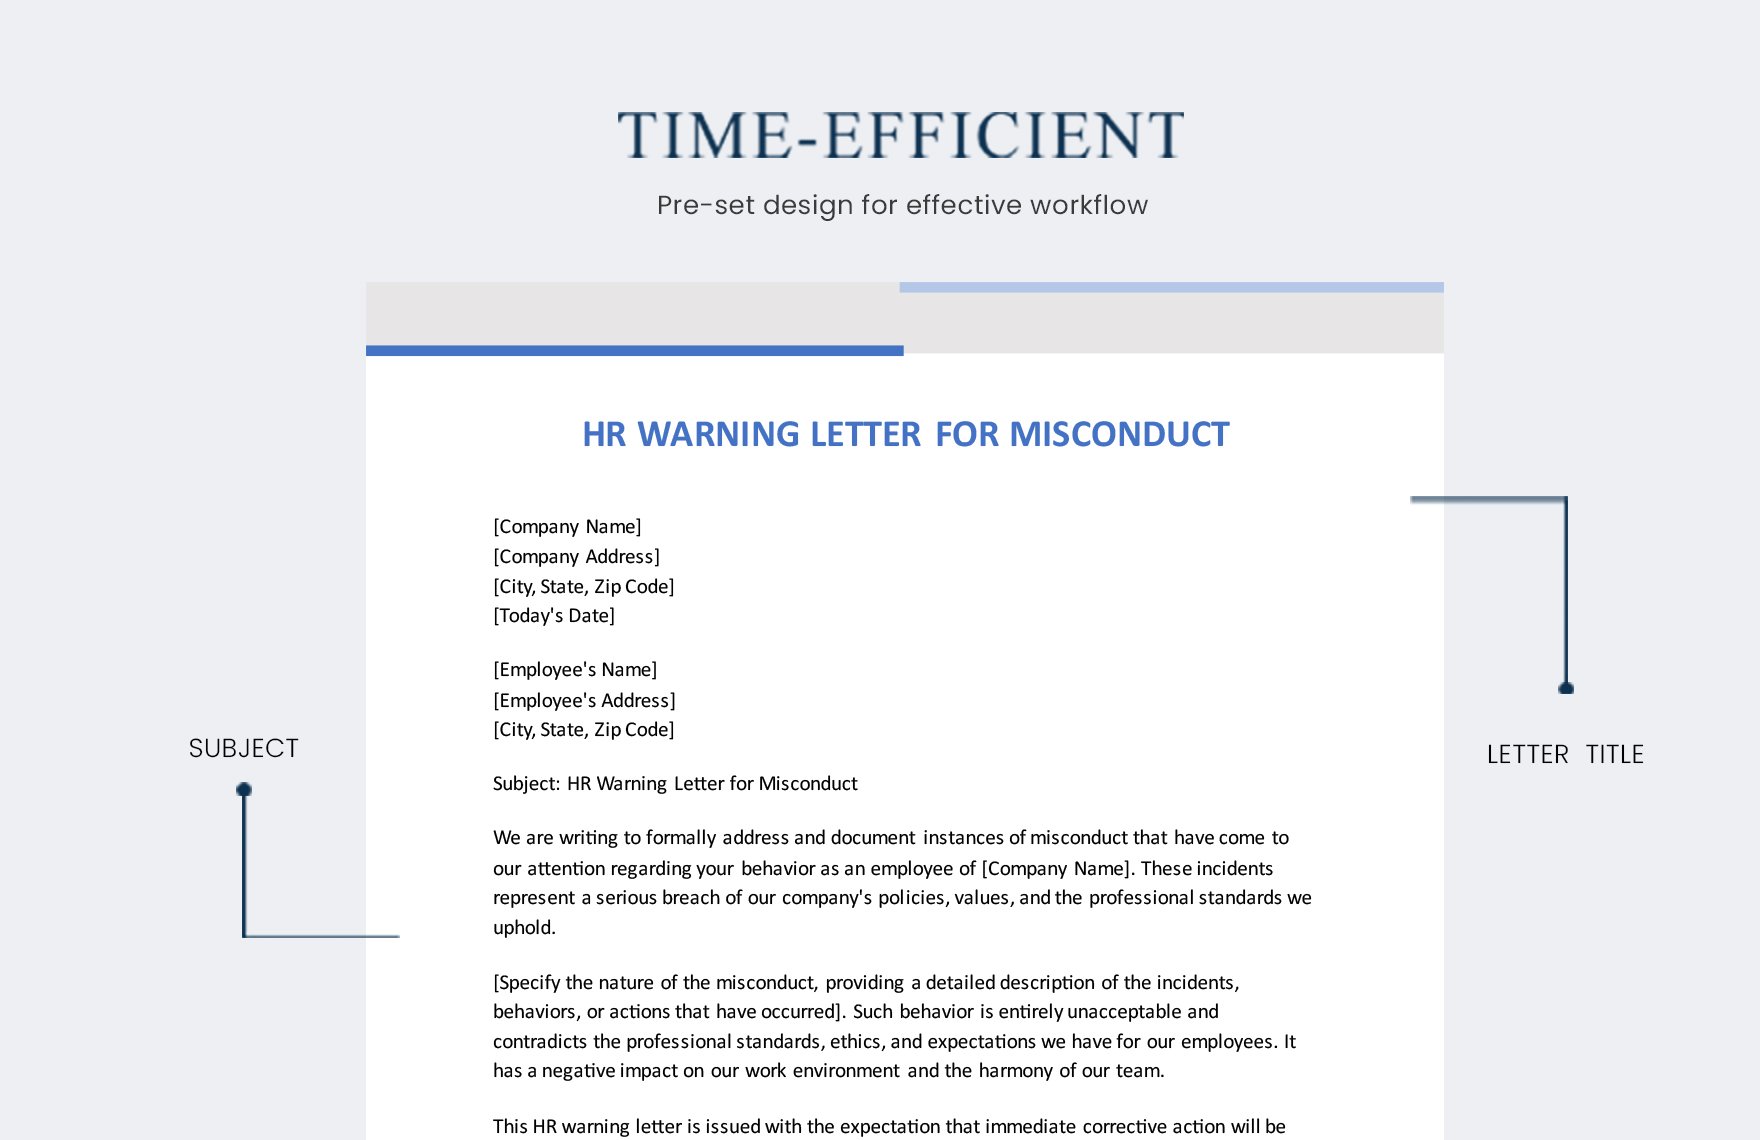 Hr Warning Letter For Misconduct